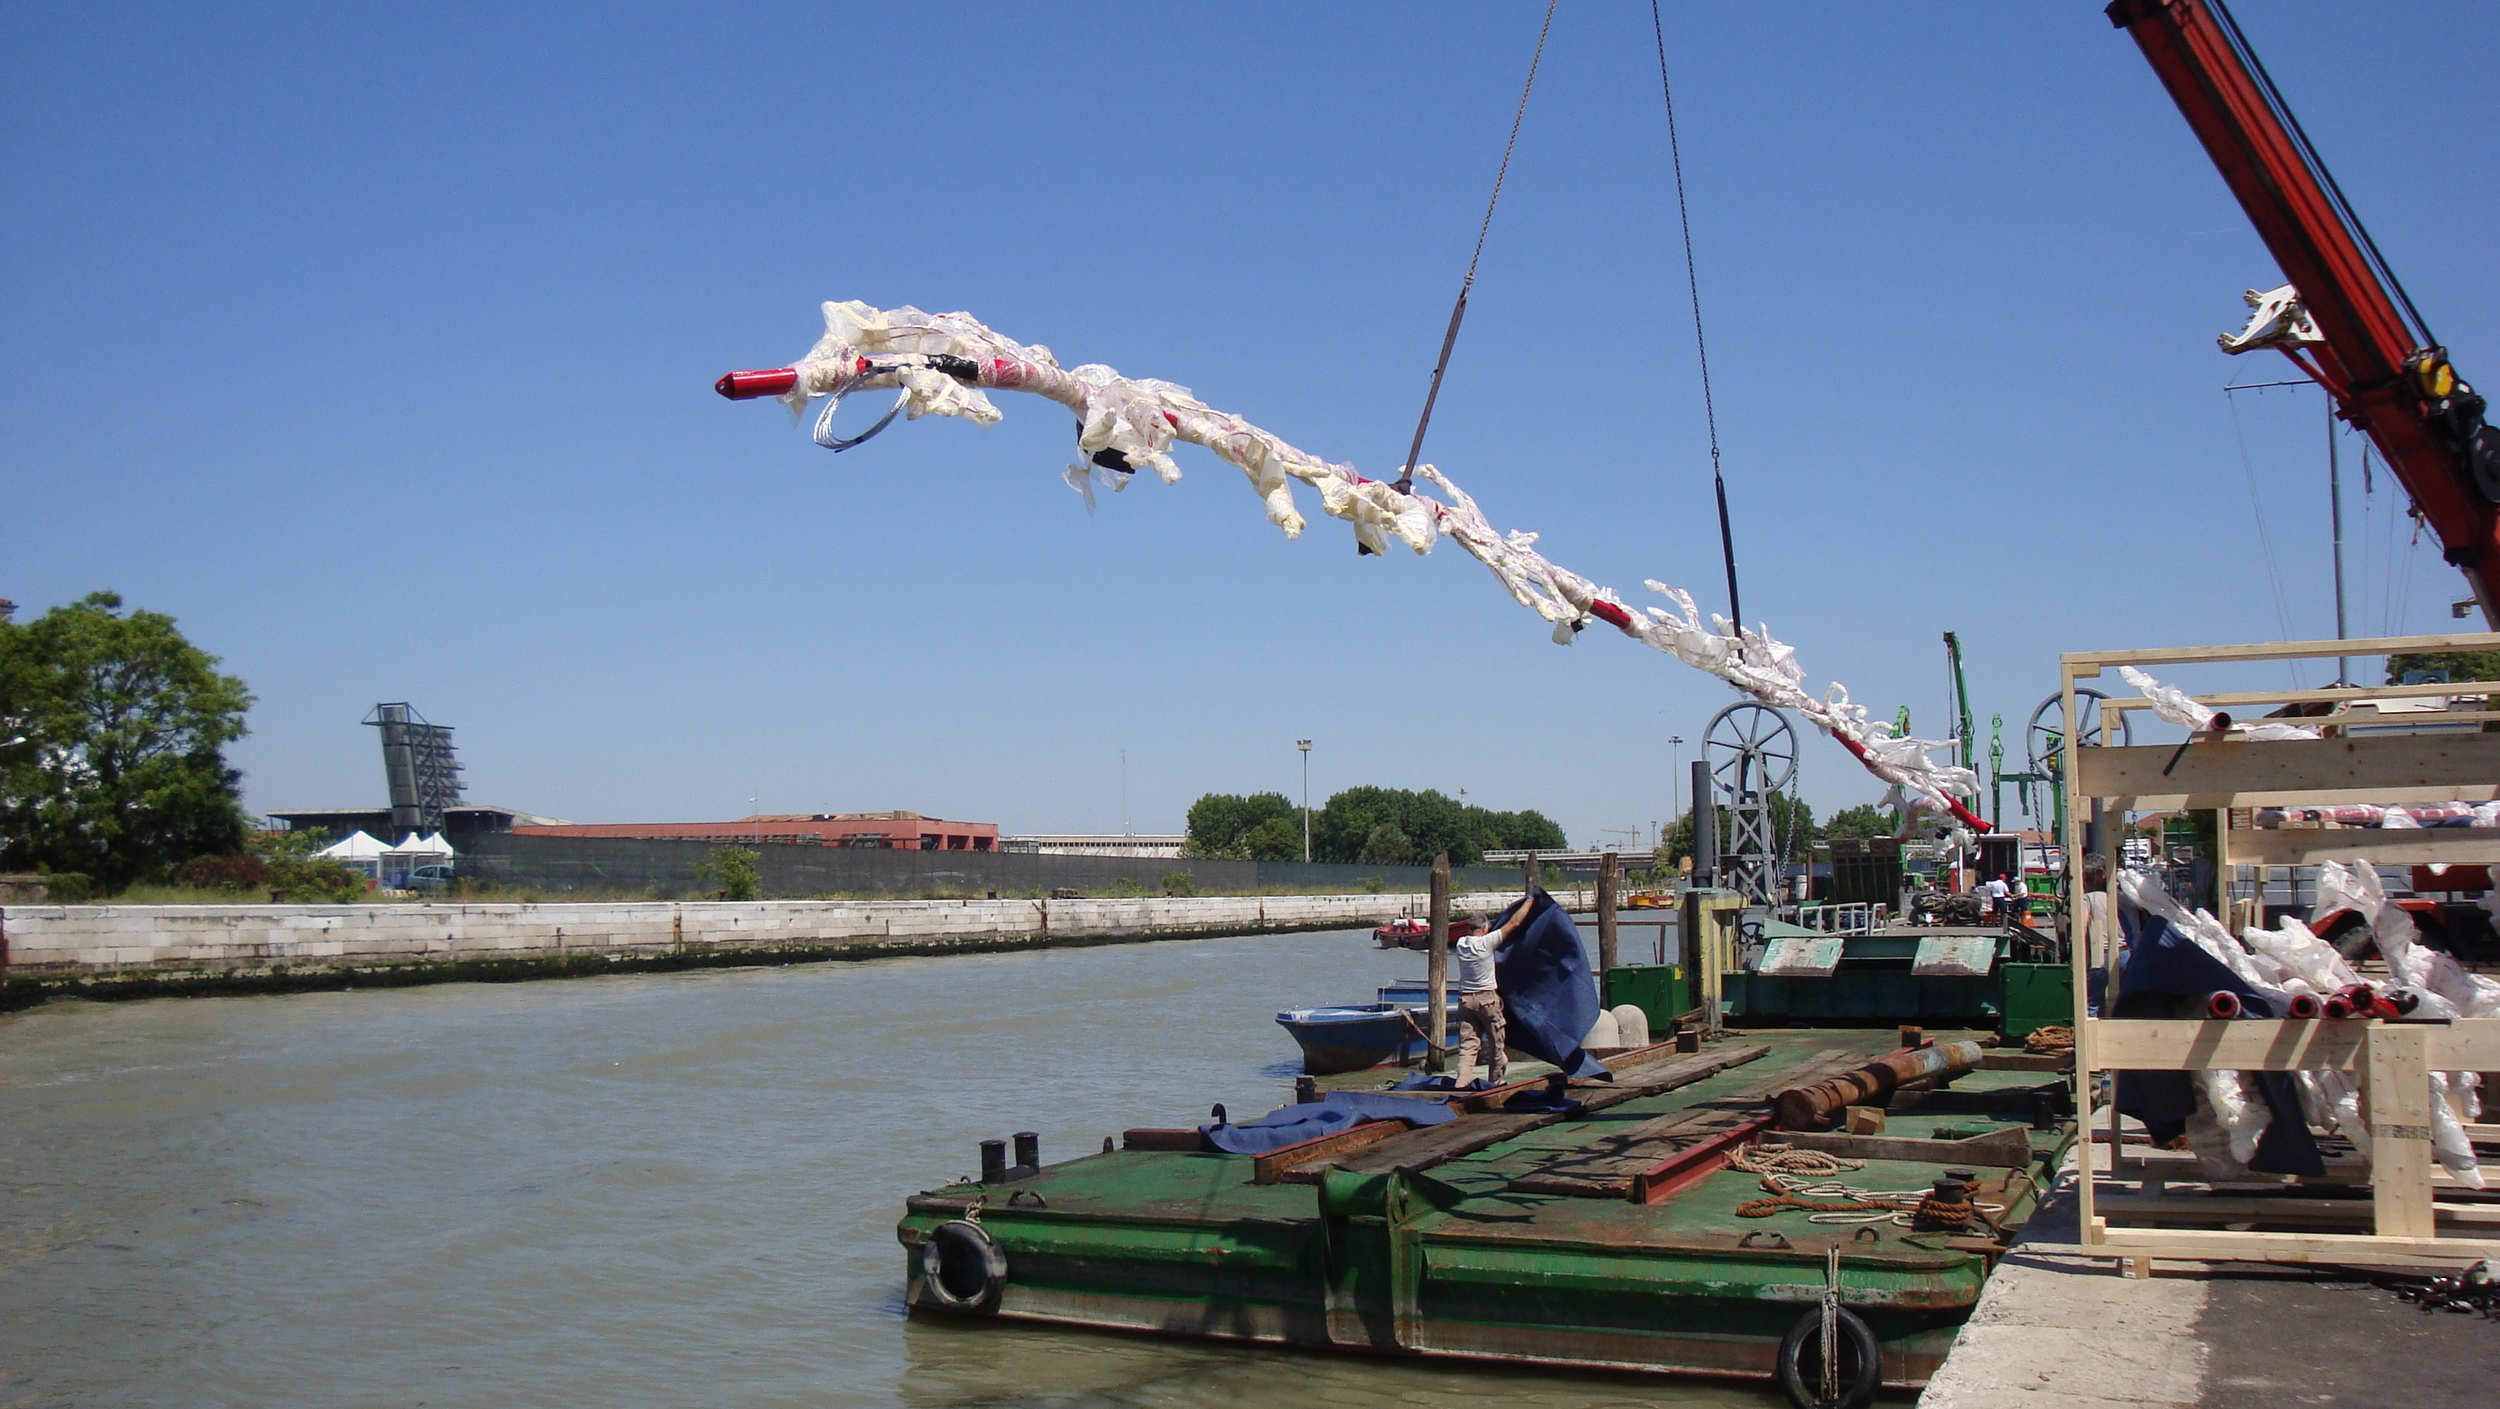 Two main ROOTS are lifted and placed on a barge that will be on its way to the Arsenale